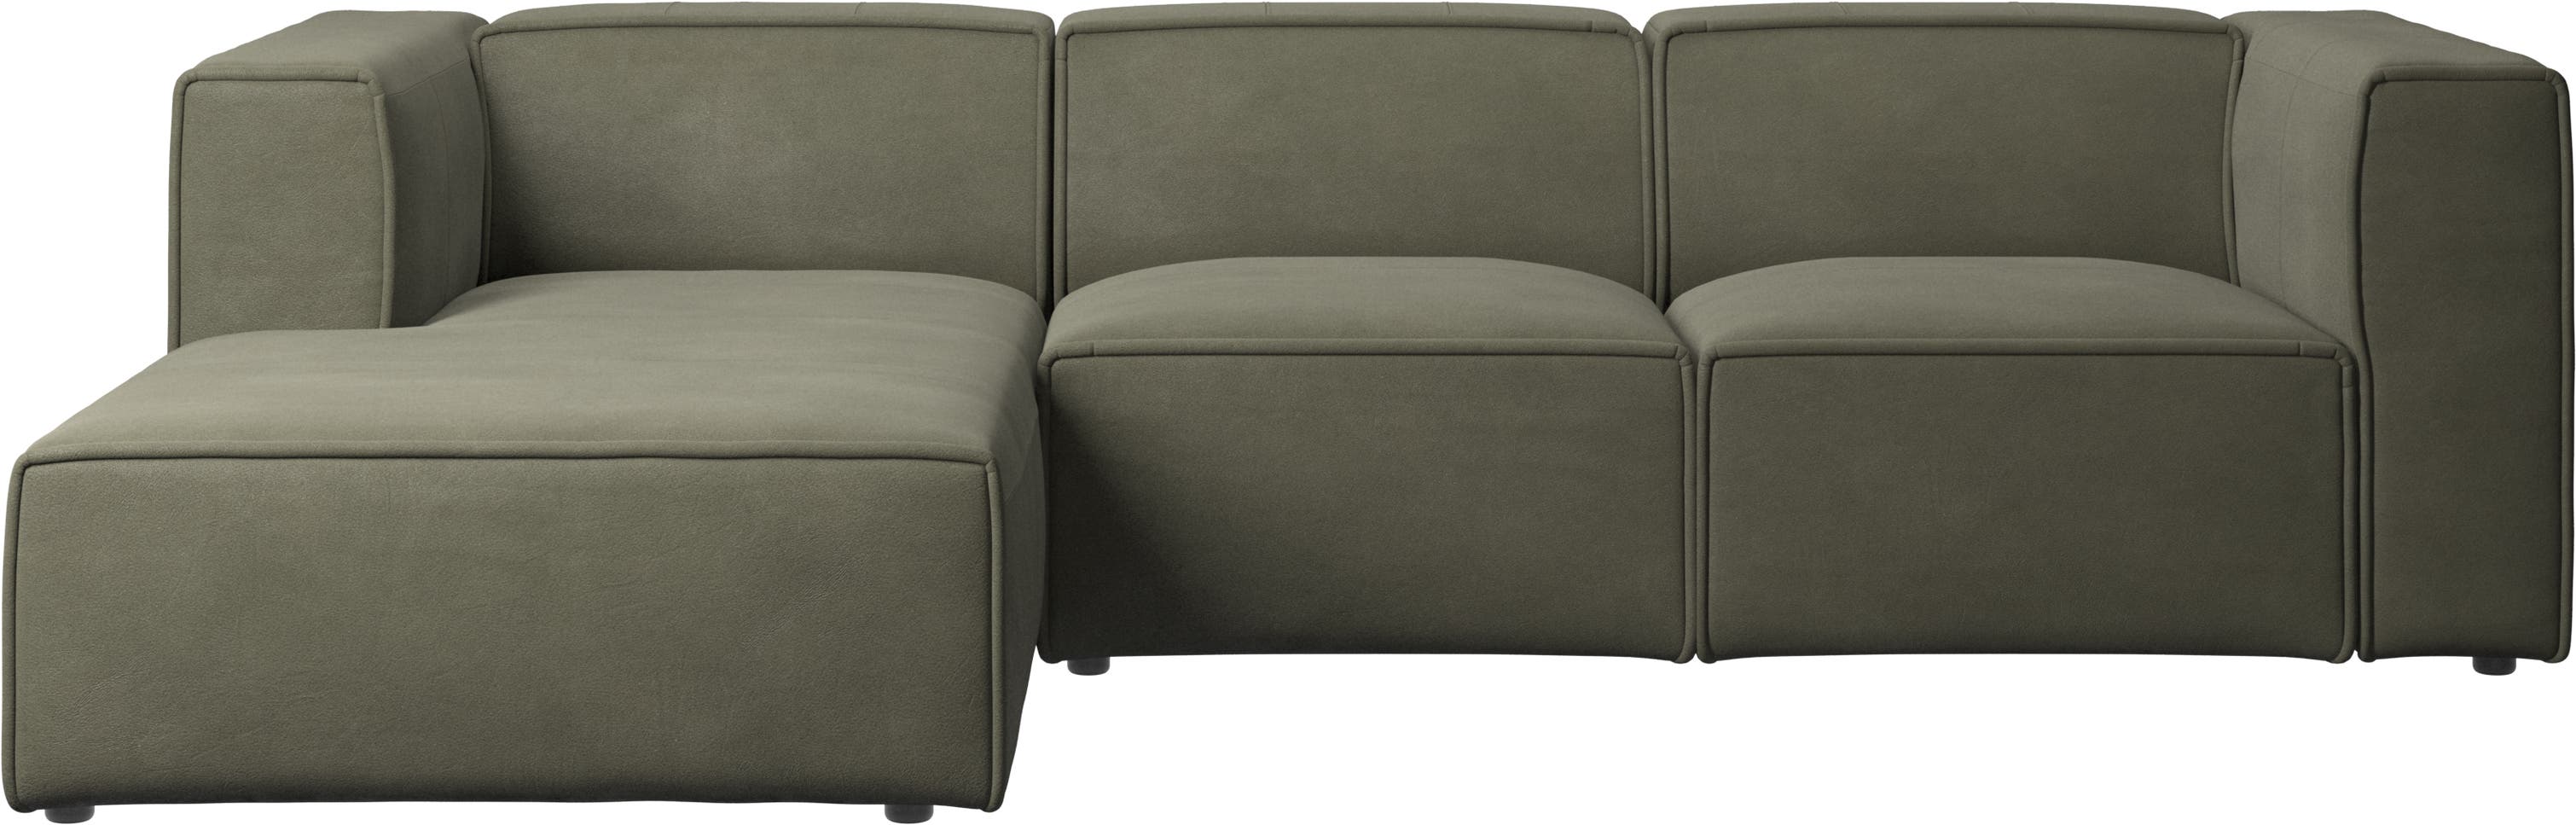 Carmo motion sofa with resting unit